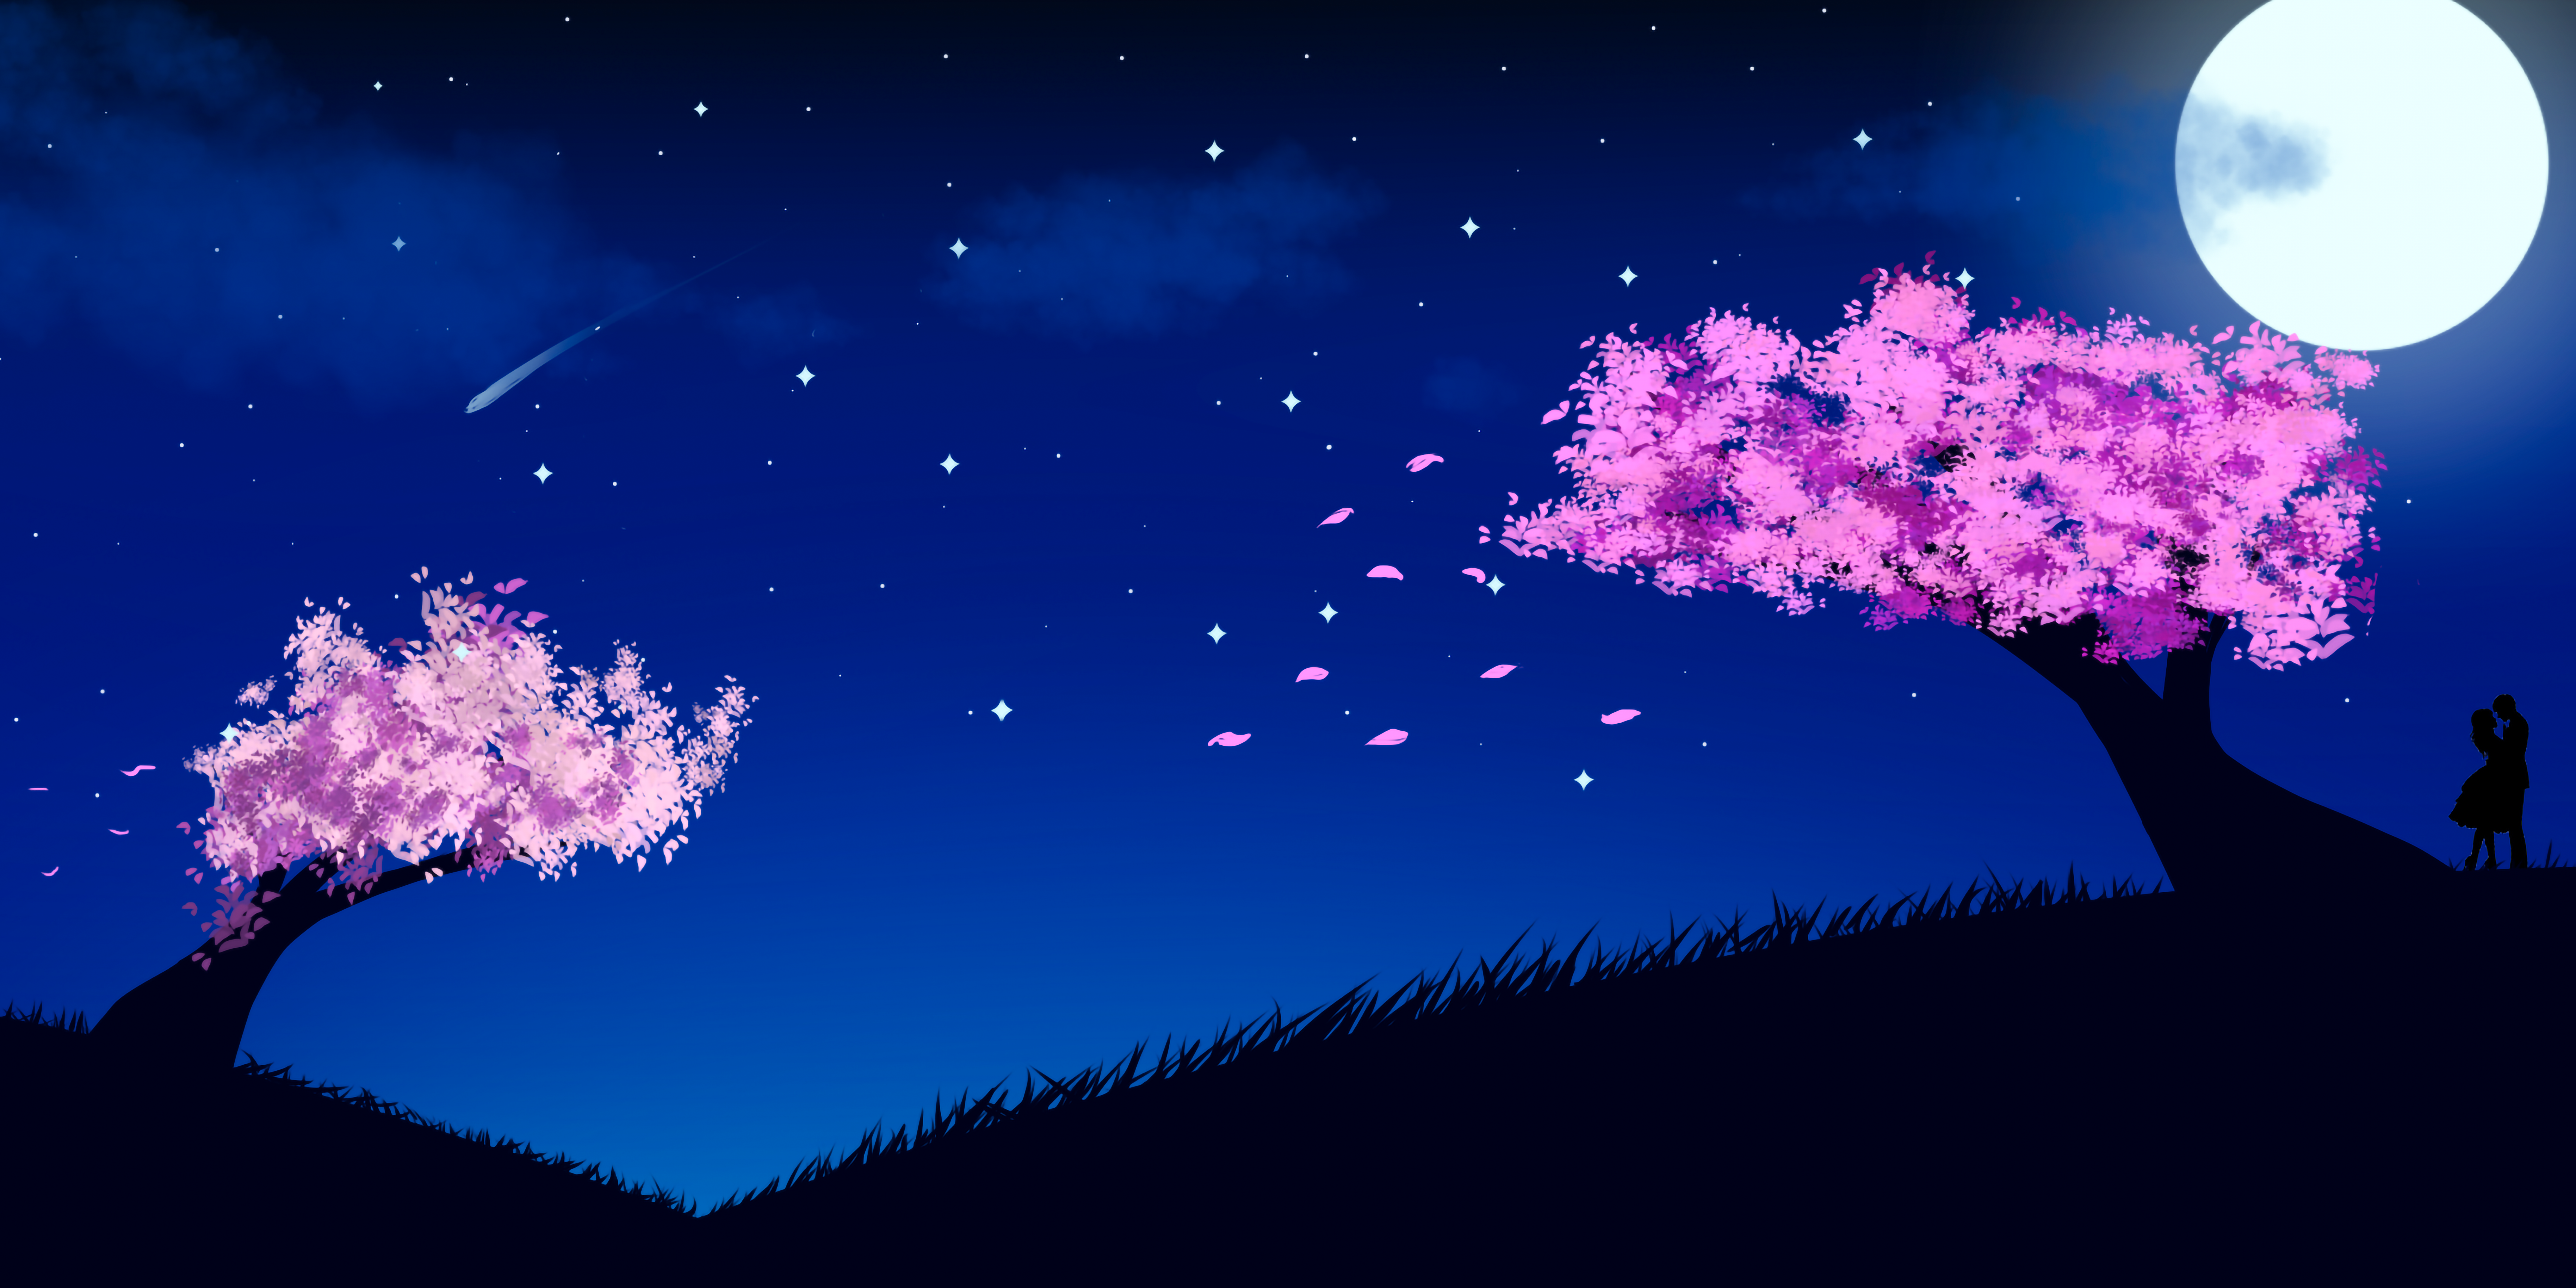 General 8640x4320 cherry blossom pink couple kissing grass landscape Moon sky night night sky clouds blue wind stars shooting stars artwork